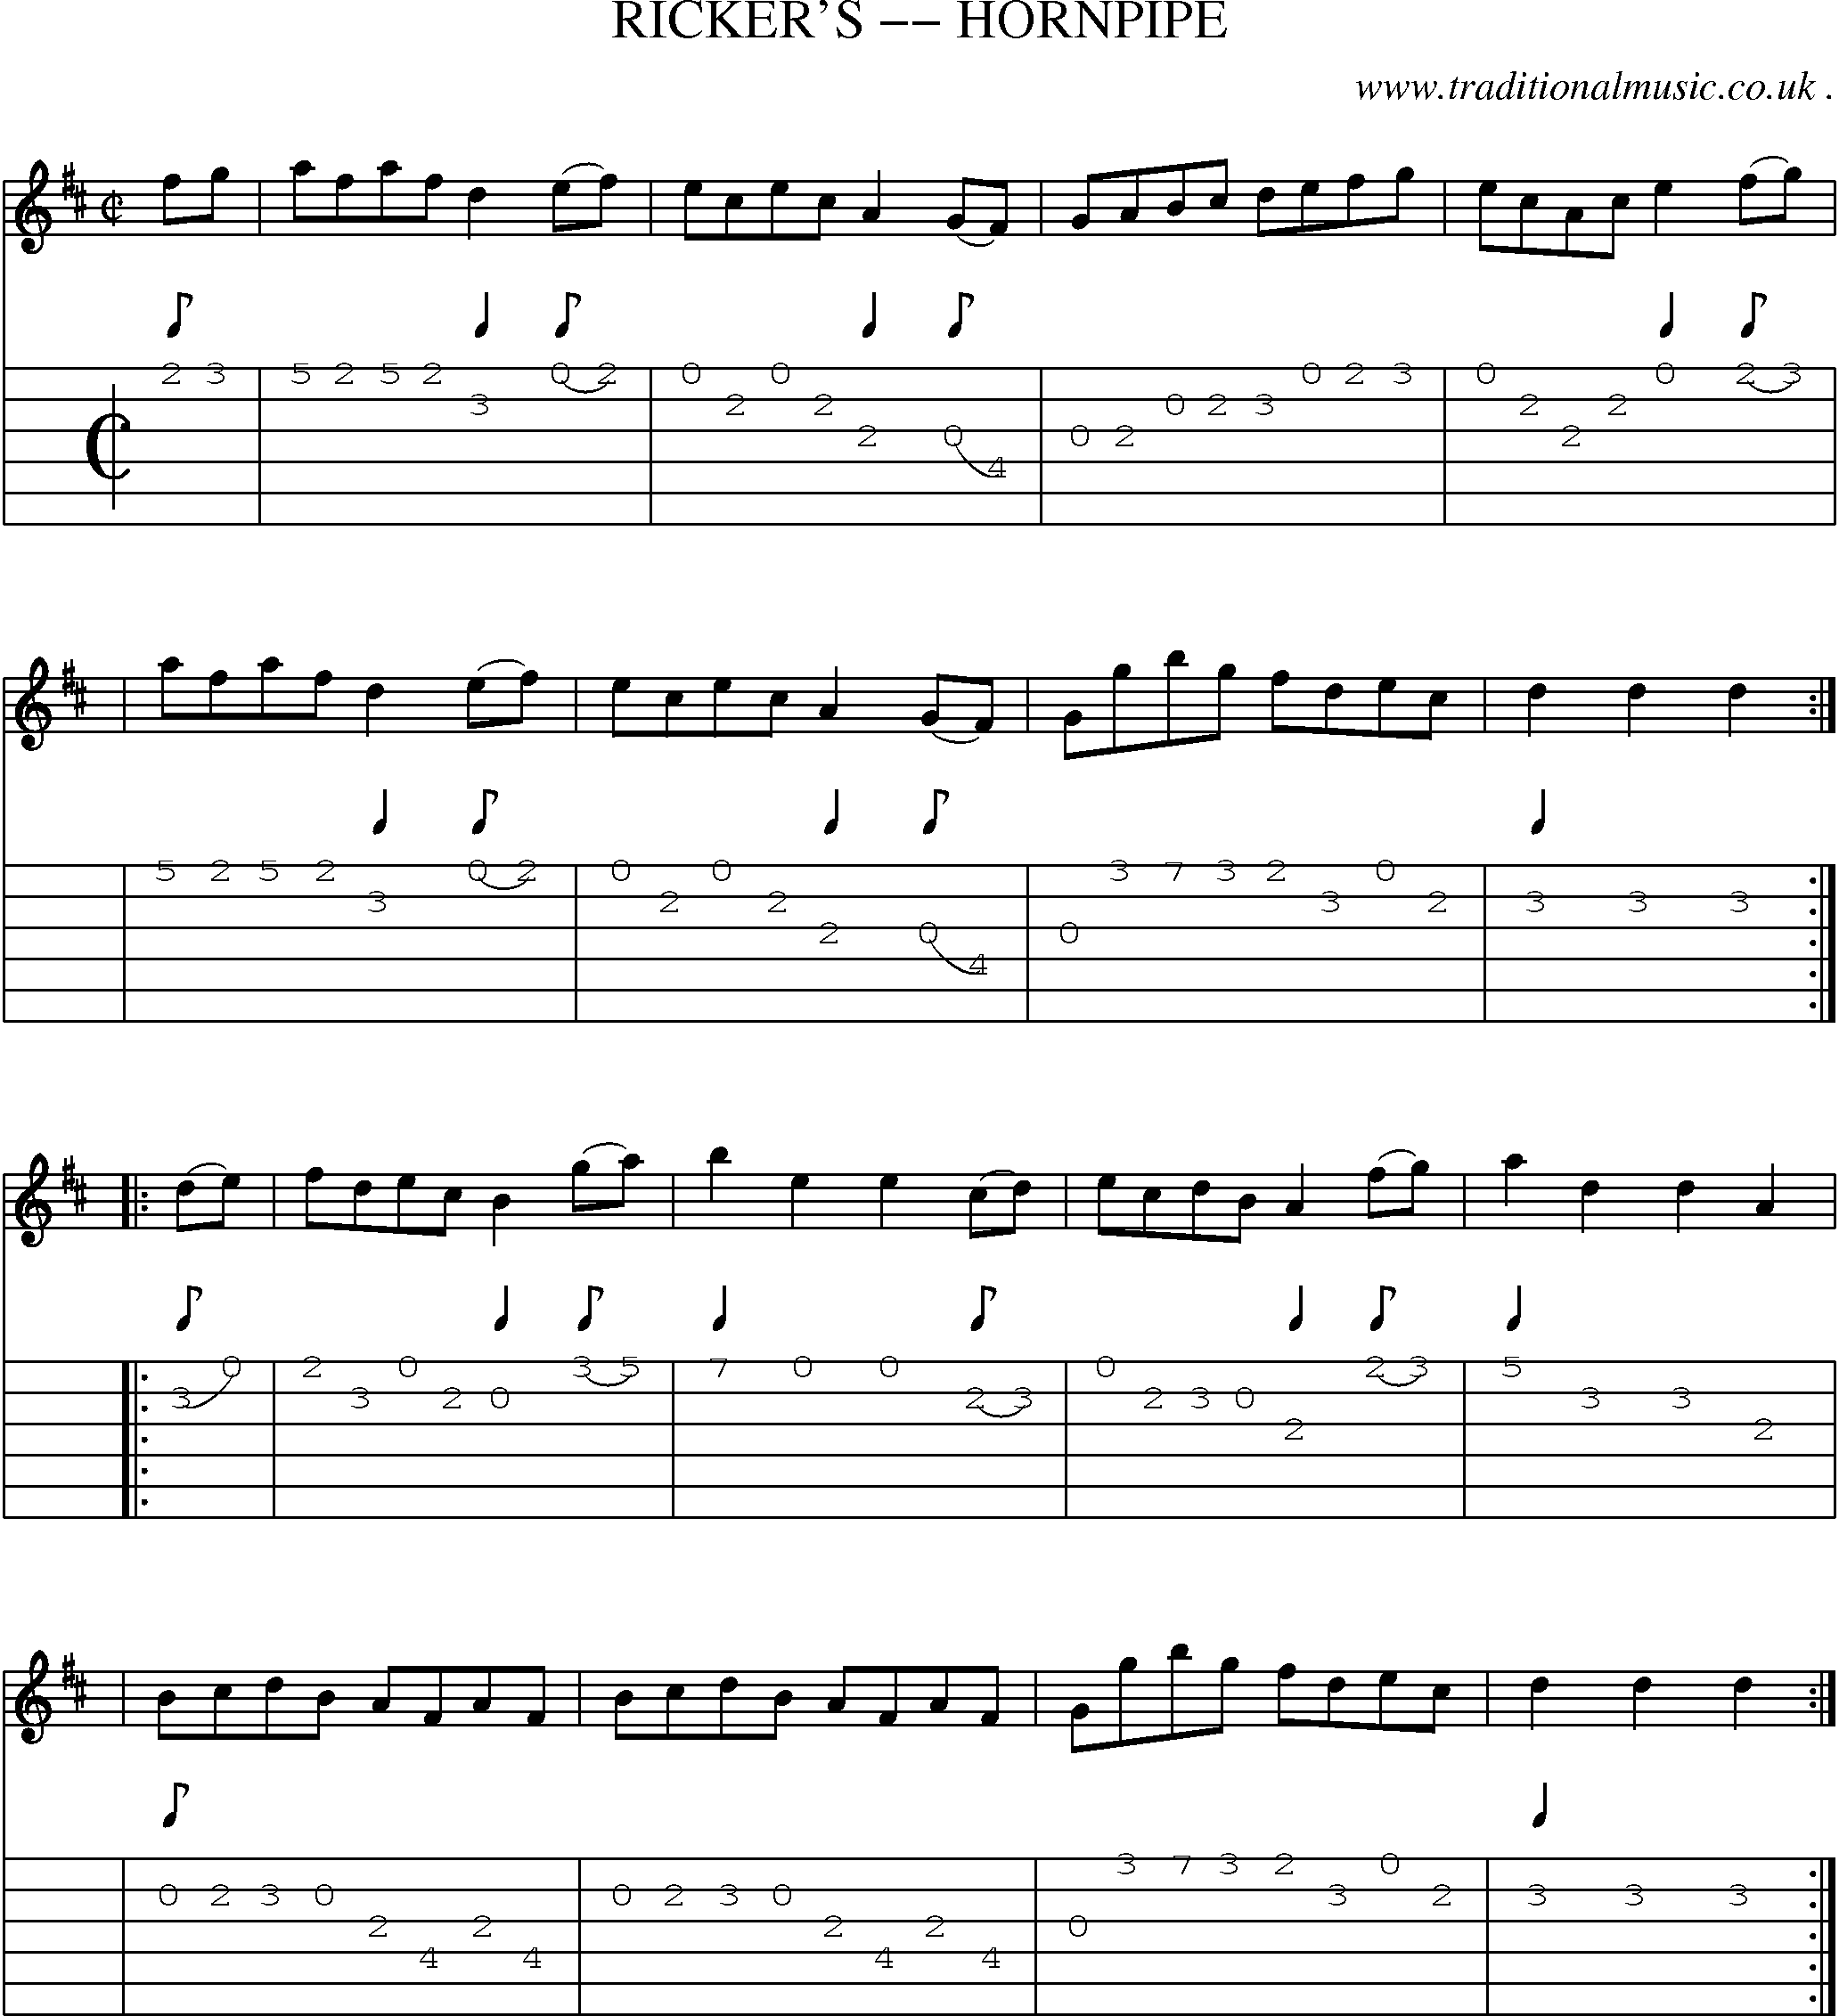 Music Score and Guitar Tabs for Rickers Hornpipe